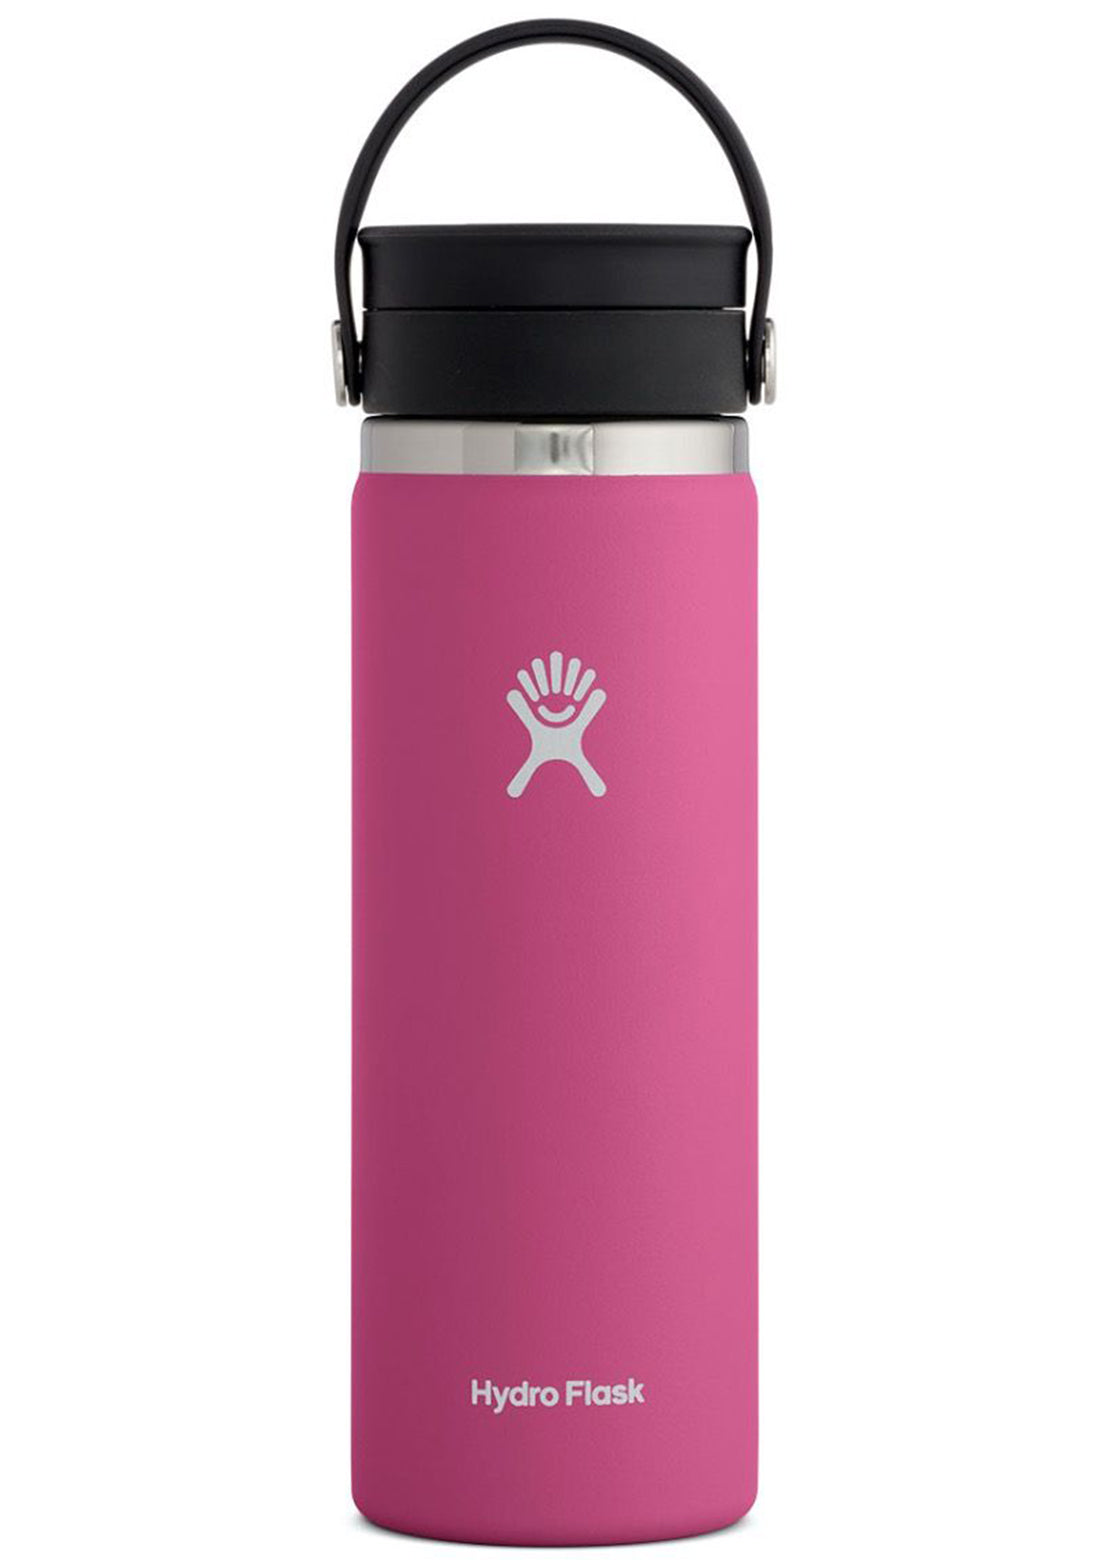 Hydro Flask 20oz Wide Mouth With Flex Sip Lid Coffee Tumbler Carnation